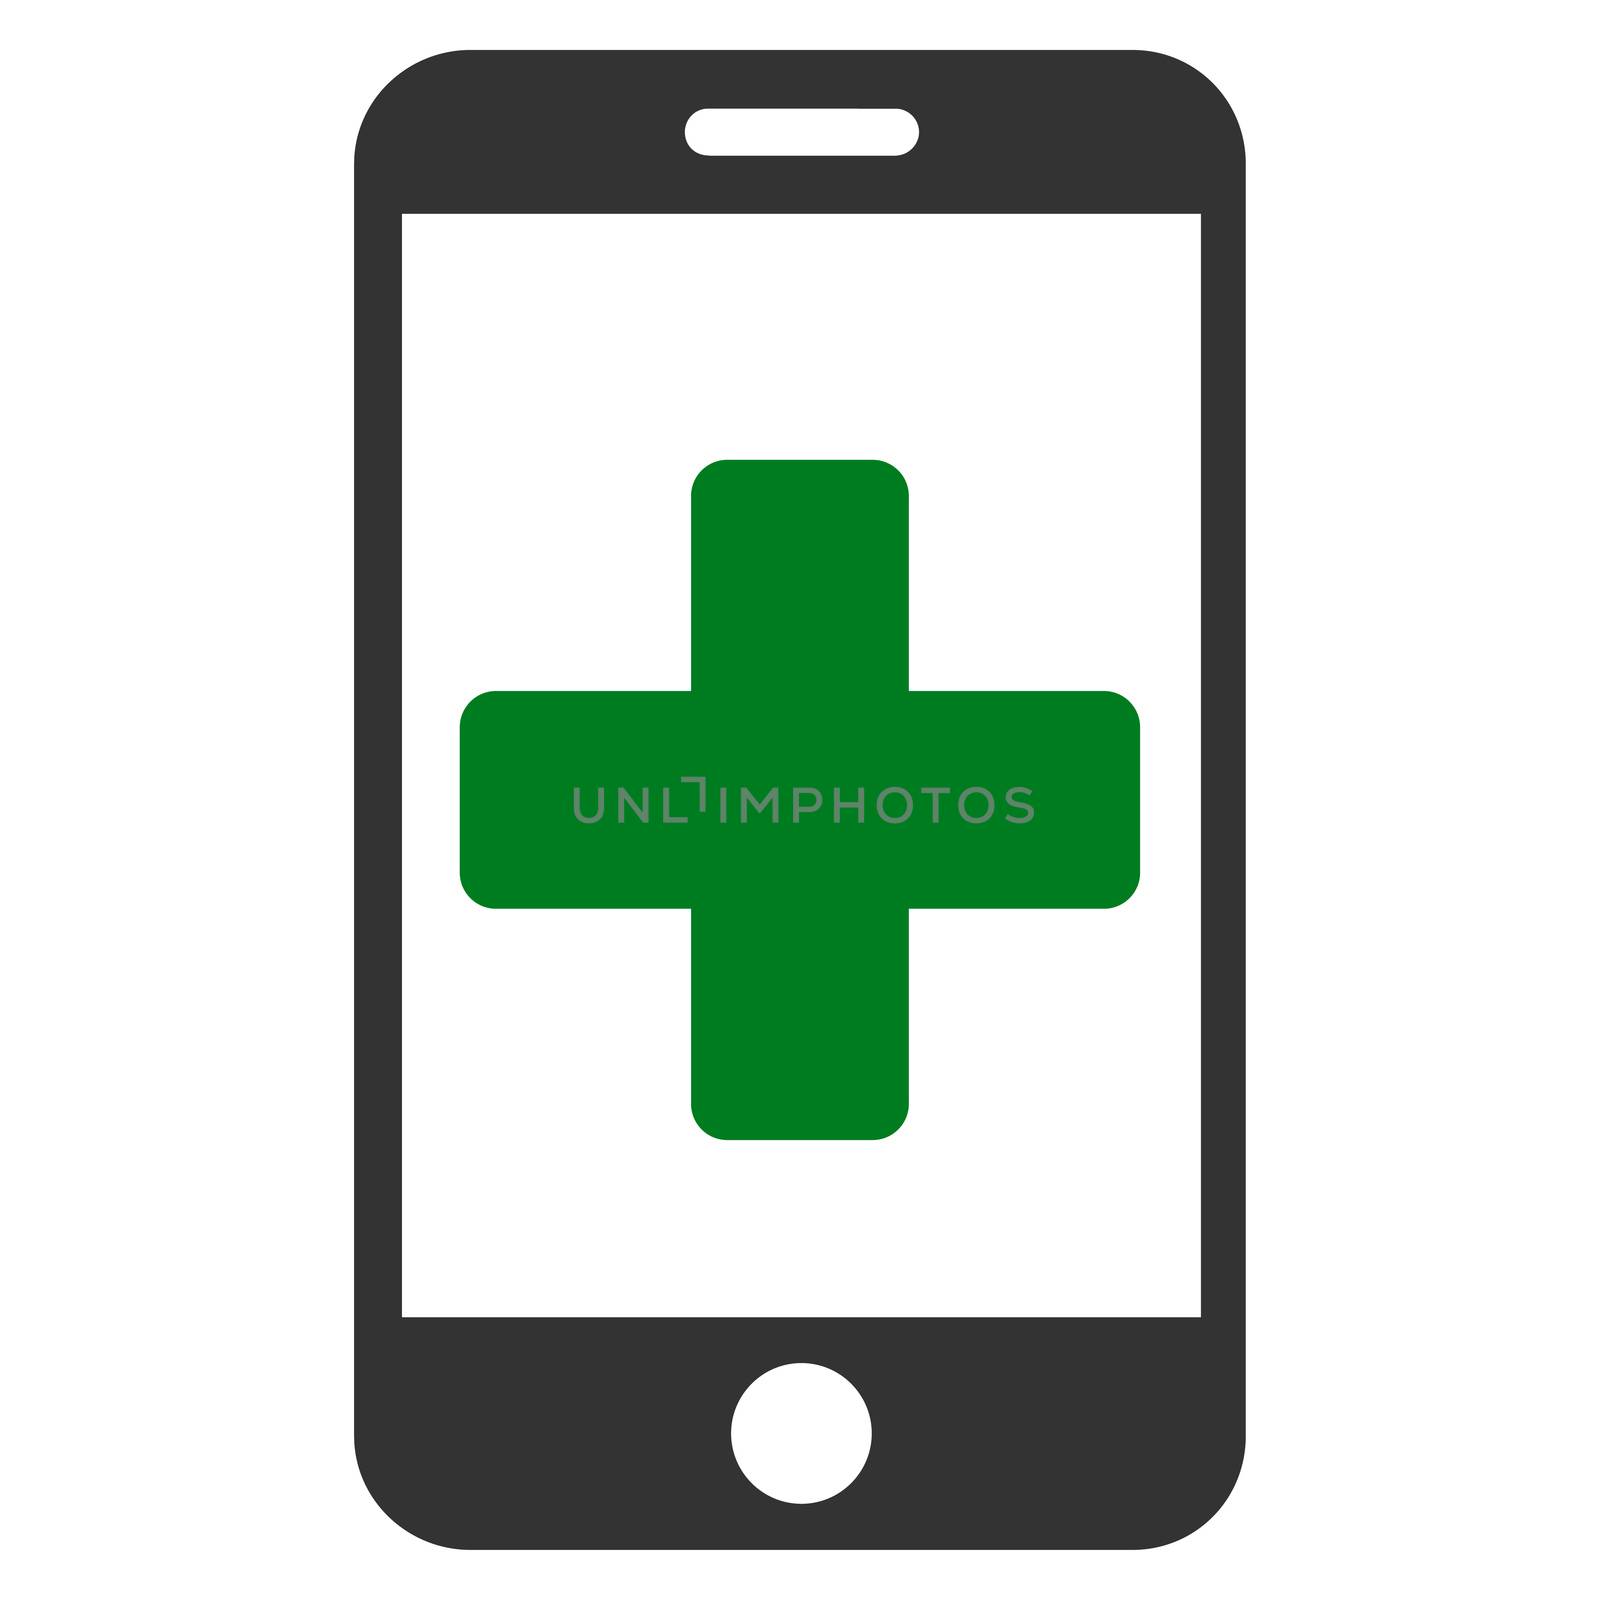 Online Help raster icon. Style is bicolor flat symbol, green and gray colors, rounded angles, white background.